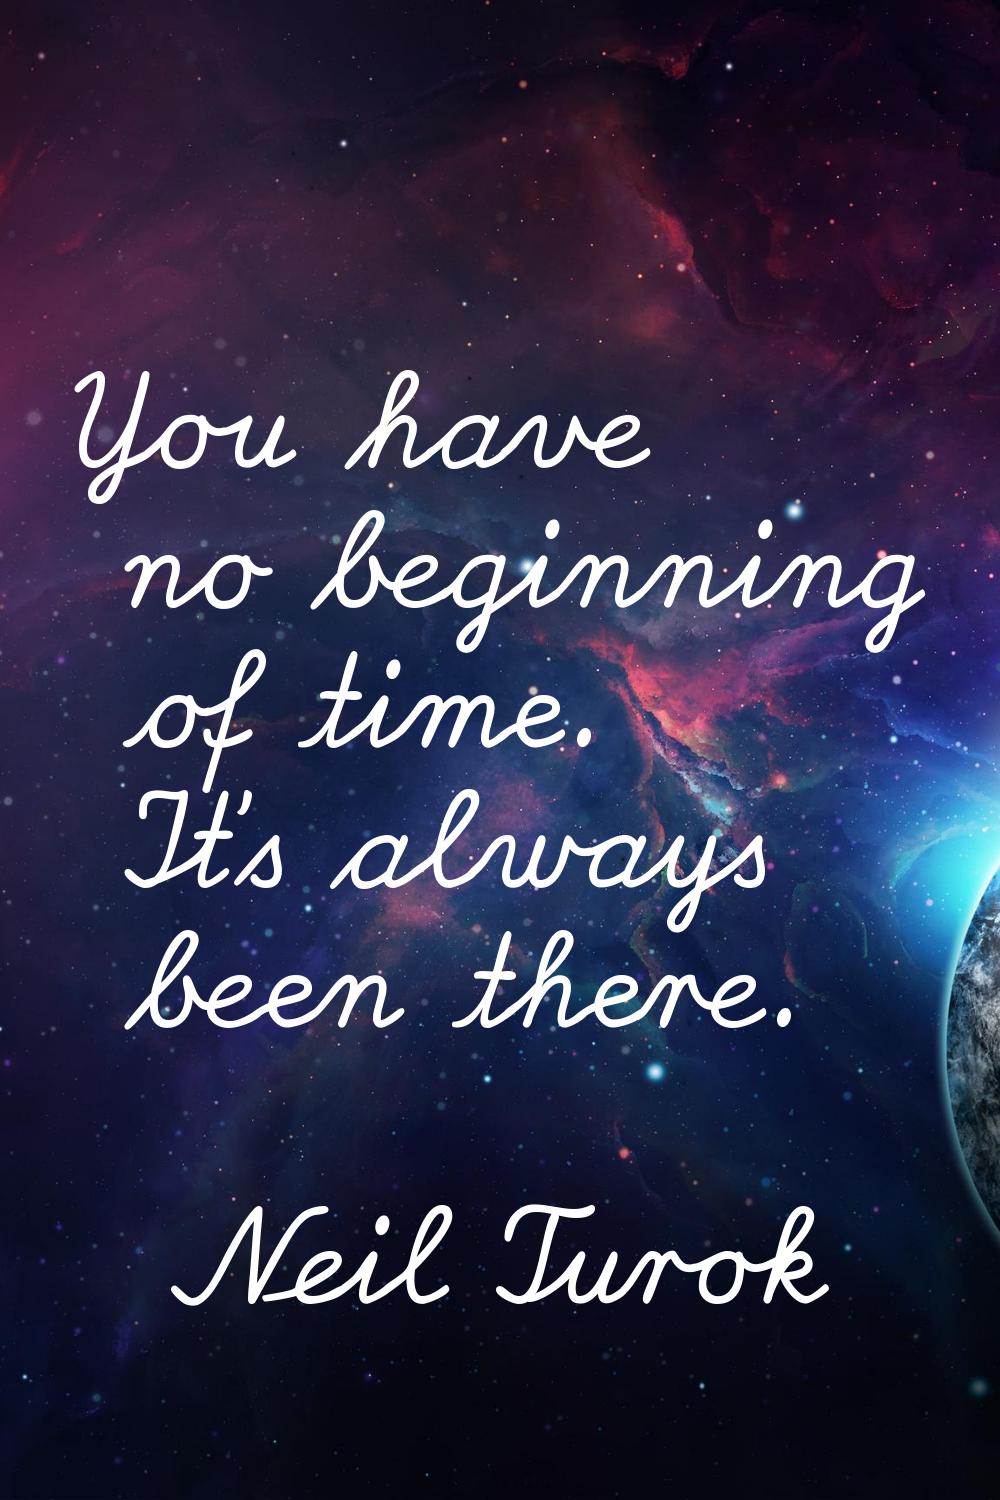 You have no beginning of time. It's always been there.